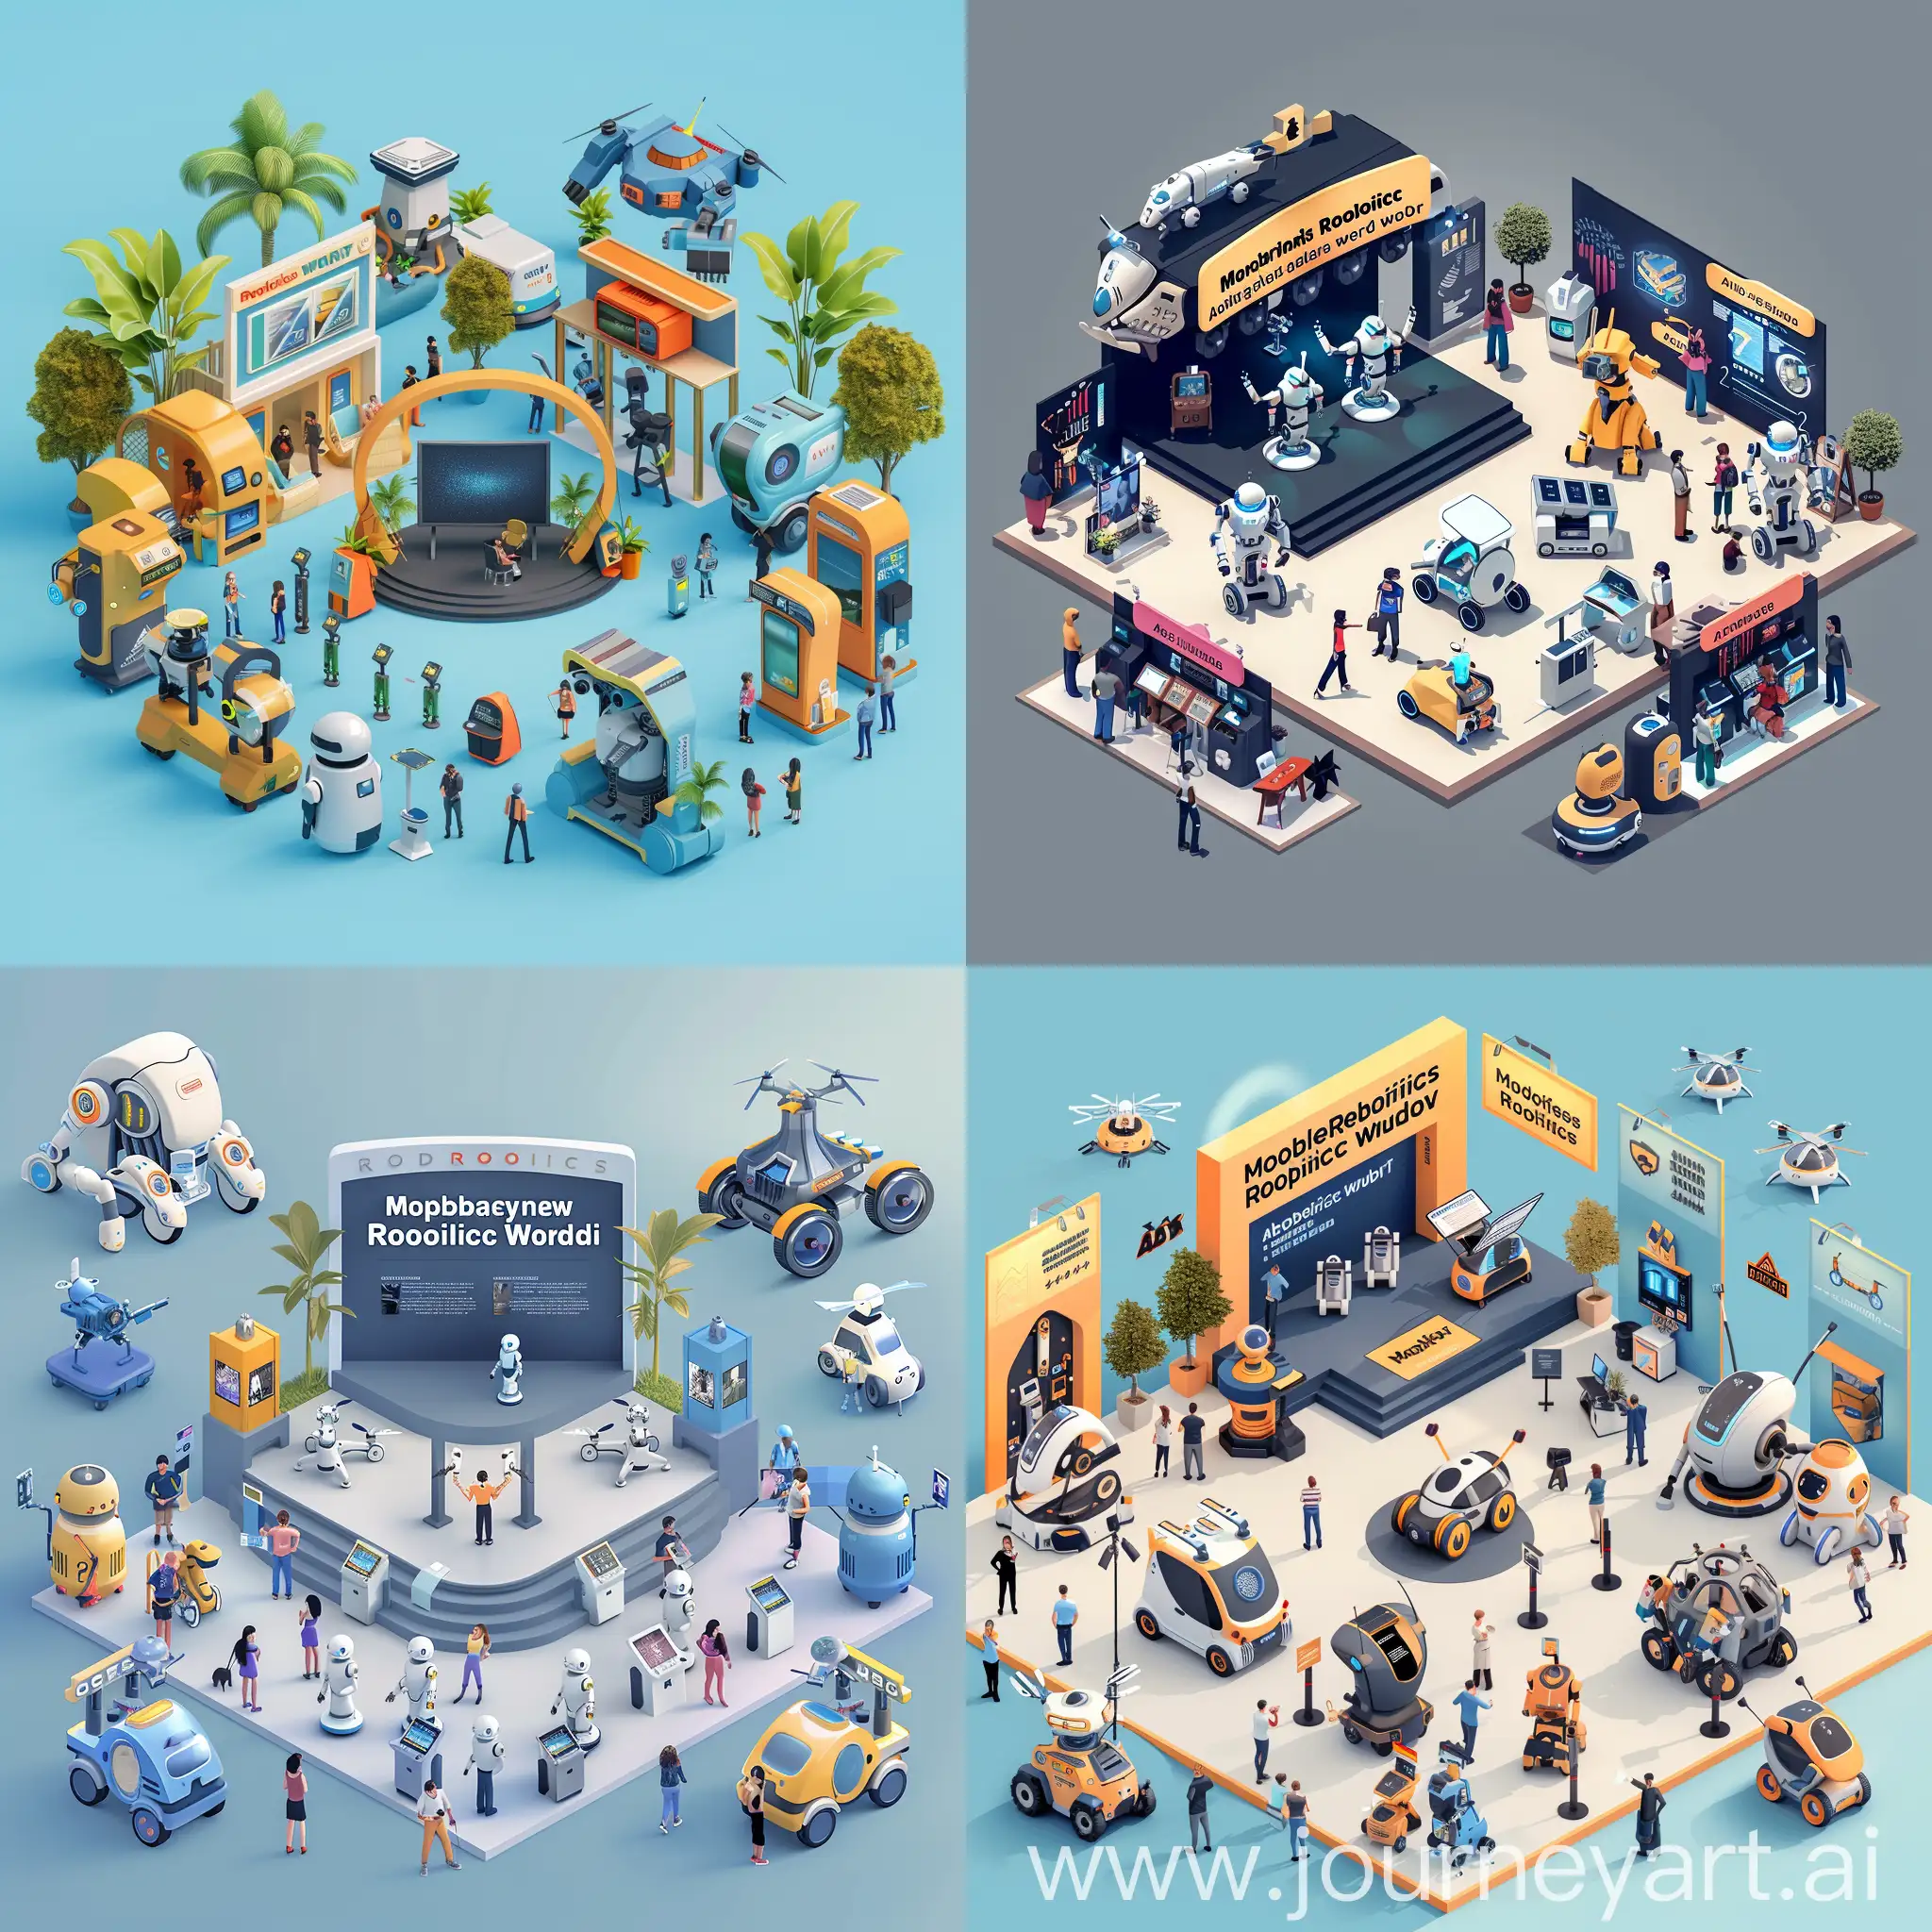 Create a 3d illustration image of Mobile robotics such as drones, Collaborative robots, industrial automation robots, pet robots, mobility assistant robots, housekeeper robots, robot dogs, military robots in the theme park(actually, it's exhibition hall). A small stage is set up in the center of the park to announce and publicize new robots, and people gather at each booth surrounding the stage to freely experience various robots. manly use these color HEX #41127c, #913e72, #fb8561, name is "Mobile Robotics World"